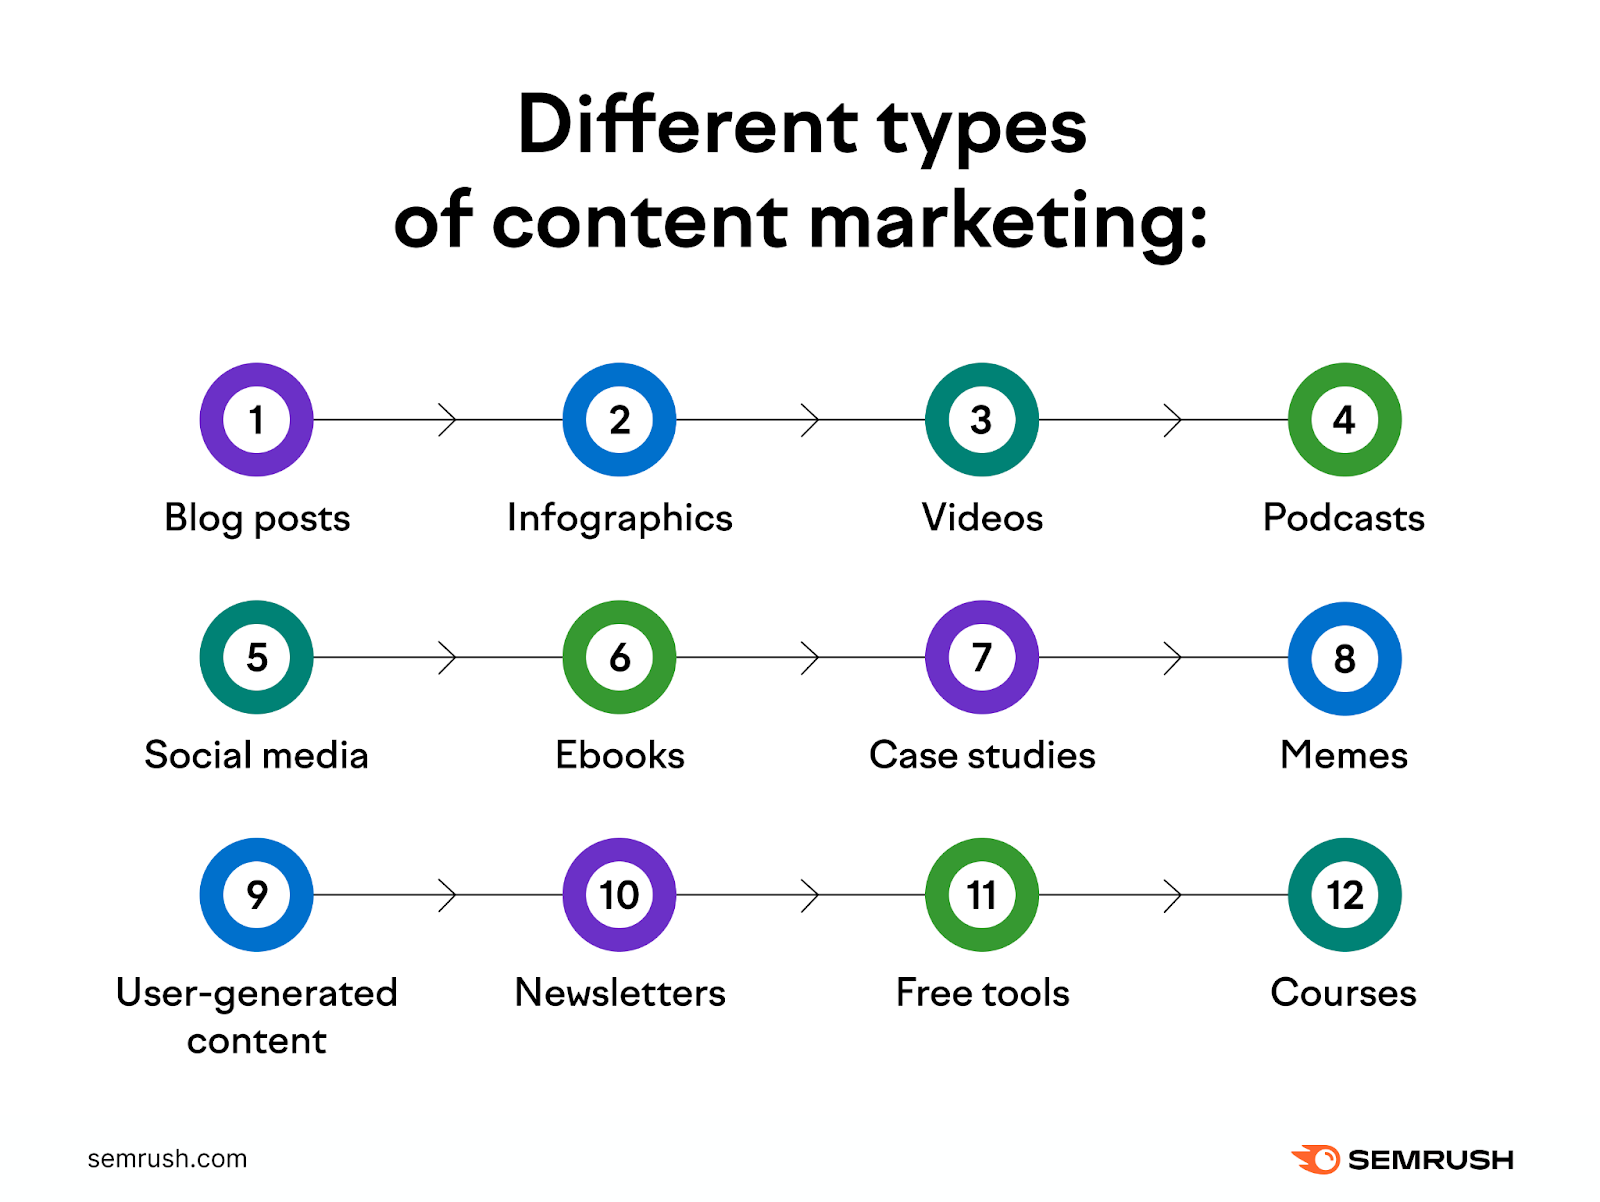 An infographic describing different types of content marketing.